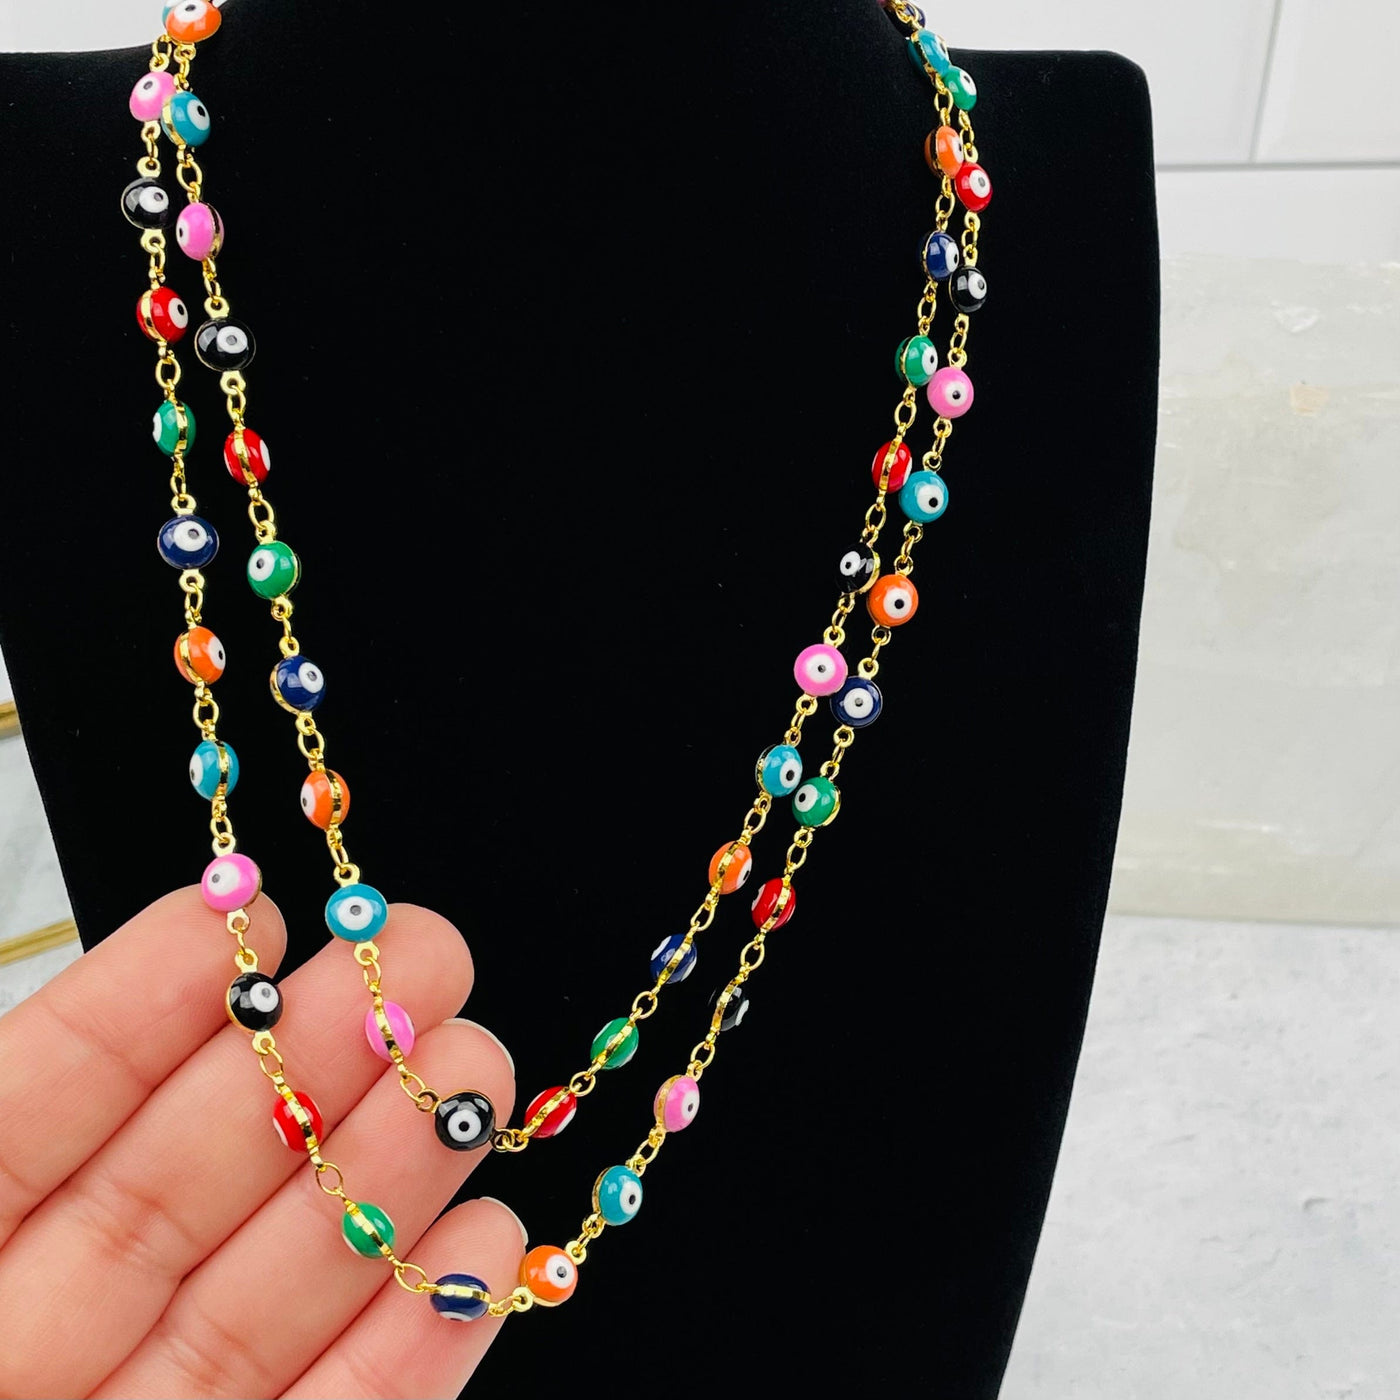 Multicolored Eye Protection Necklace